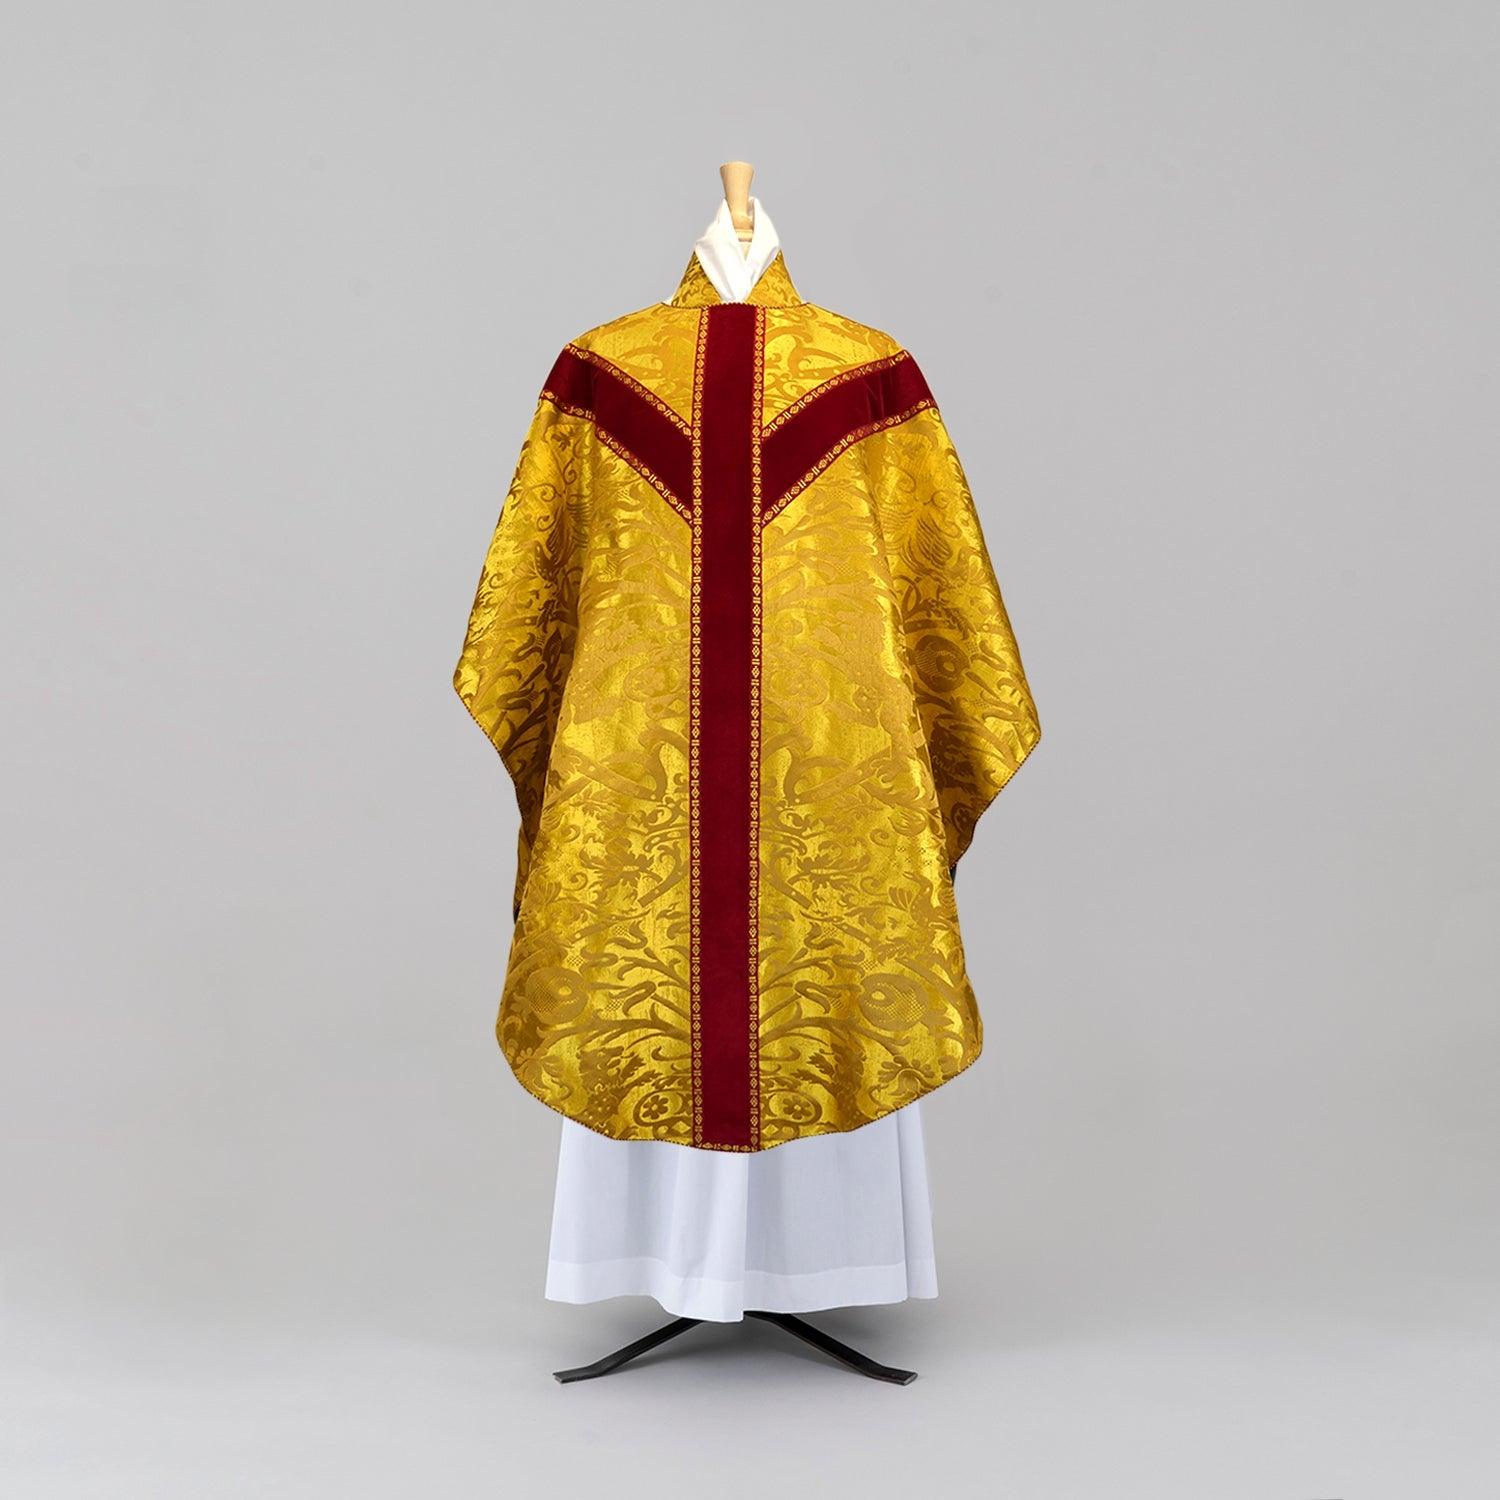 Semi-Gothic Chasuble in Gold 'Cannaregio' with Berry Velvet Orphreys and Phoenix Embroidery - Watts & Co.